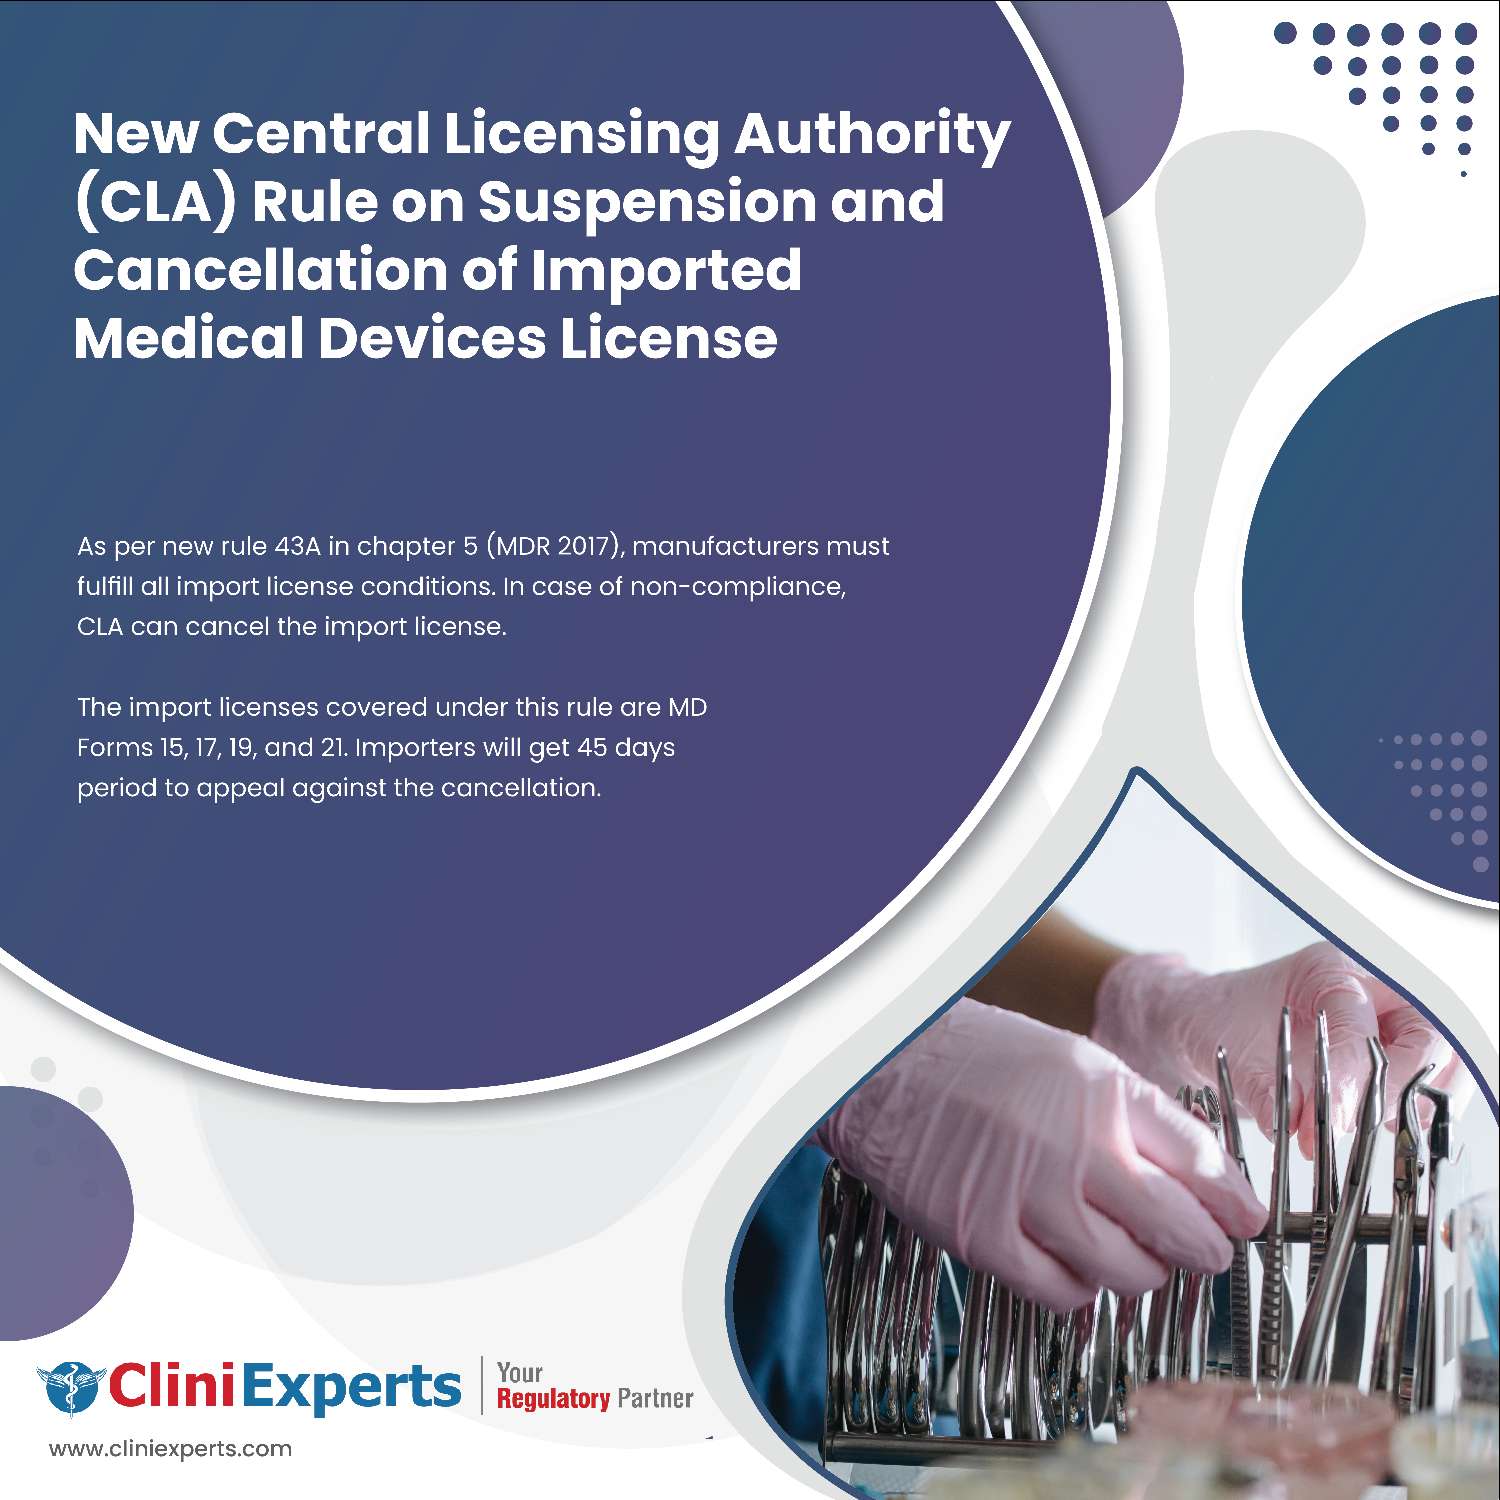 New Rules added by the CLA on suspension and cancellation of license of imported Medical Devices.